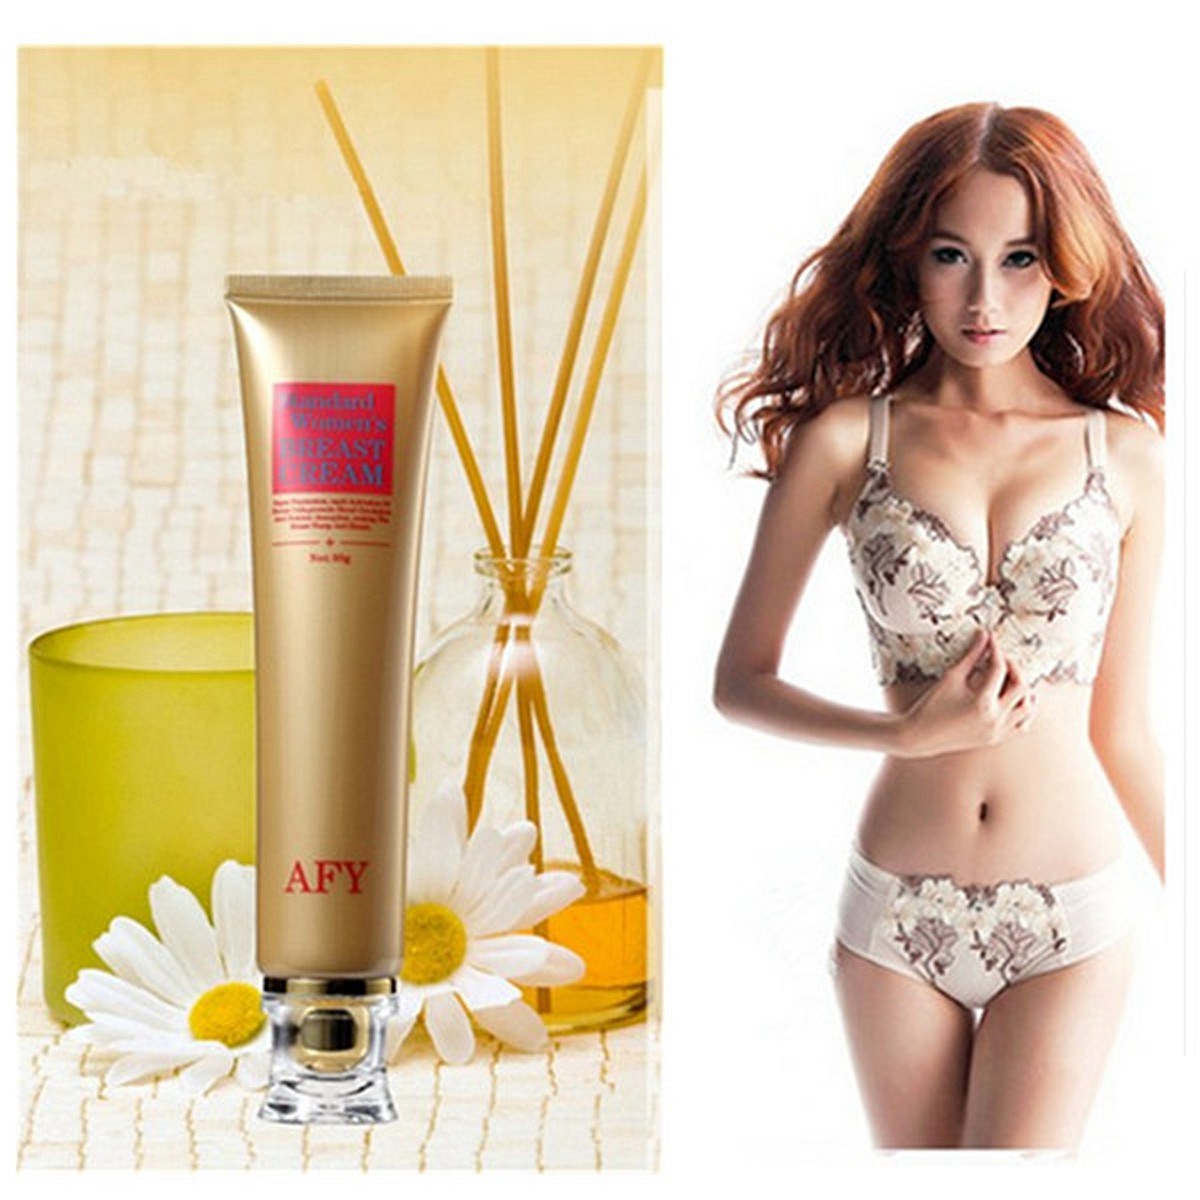 Hot Breast Cream for Beauty Women Big Bust Boost Boobs Breasts Firmer Large Enlargement Firming Lifting